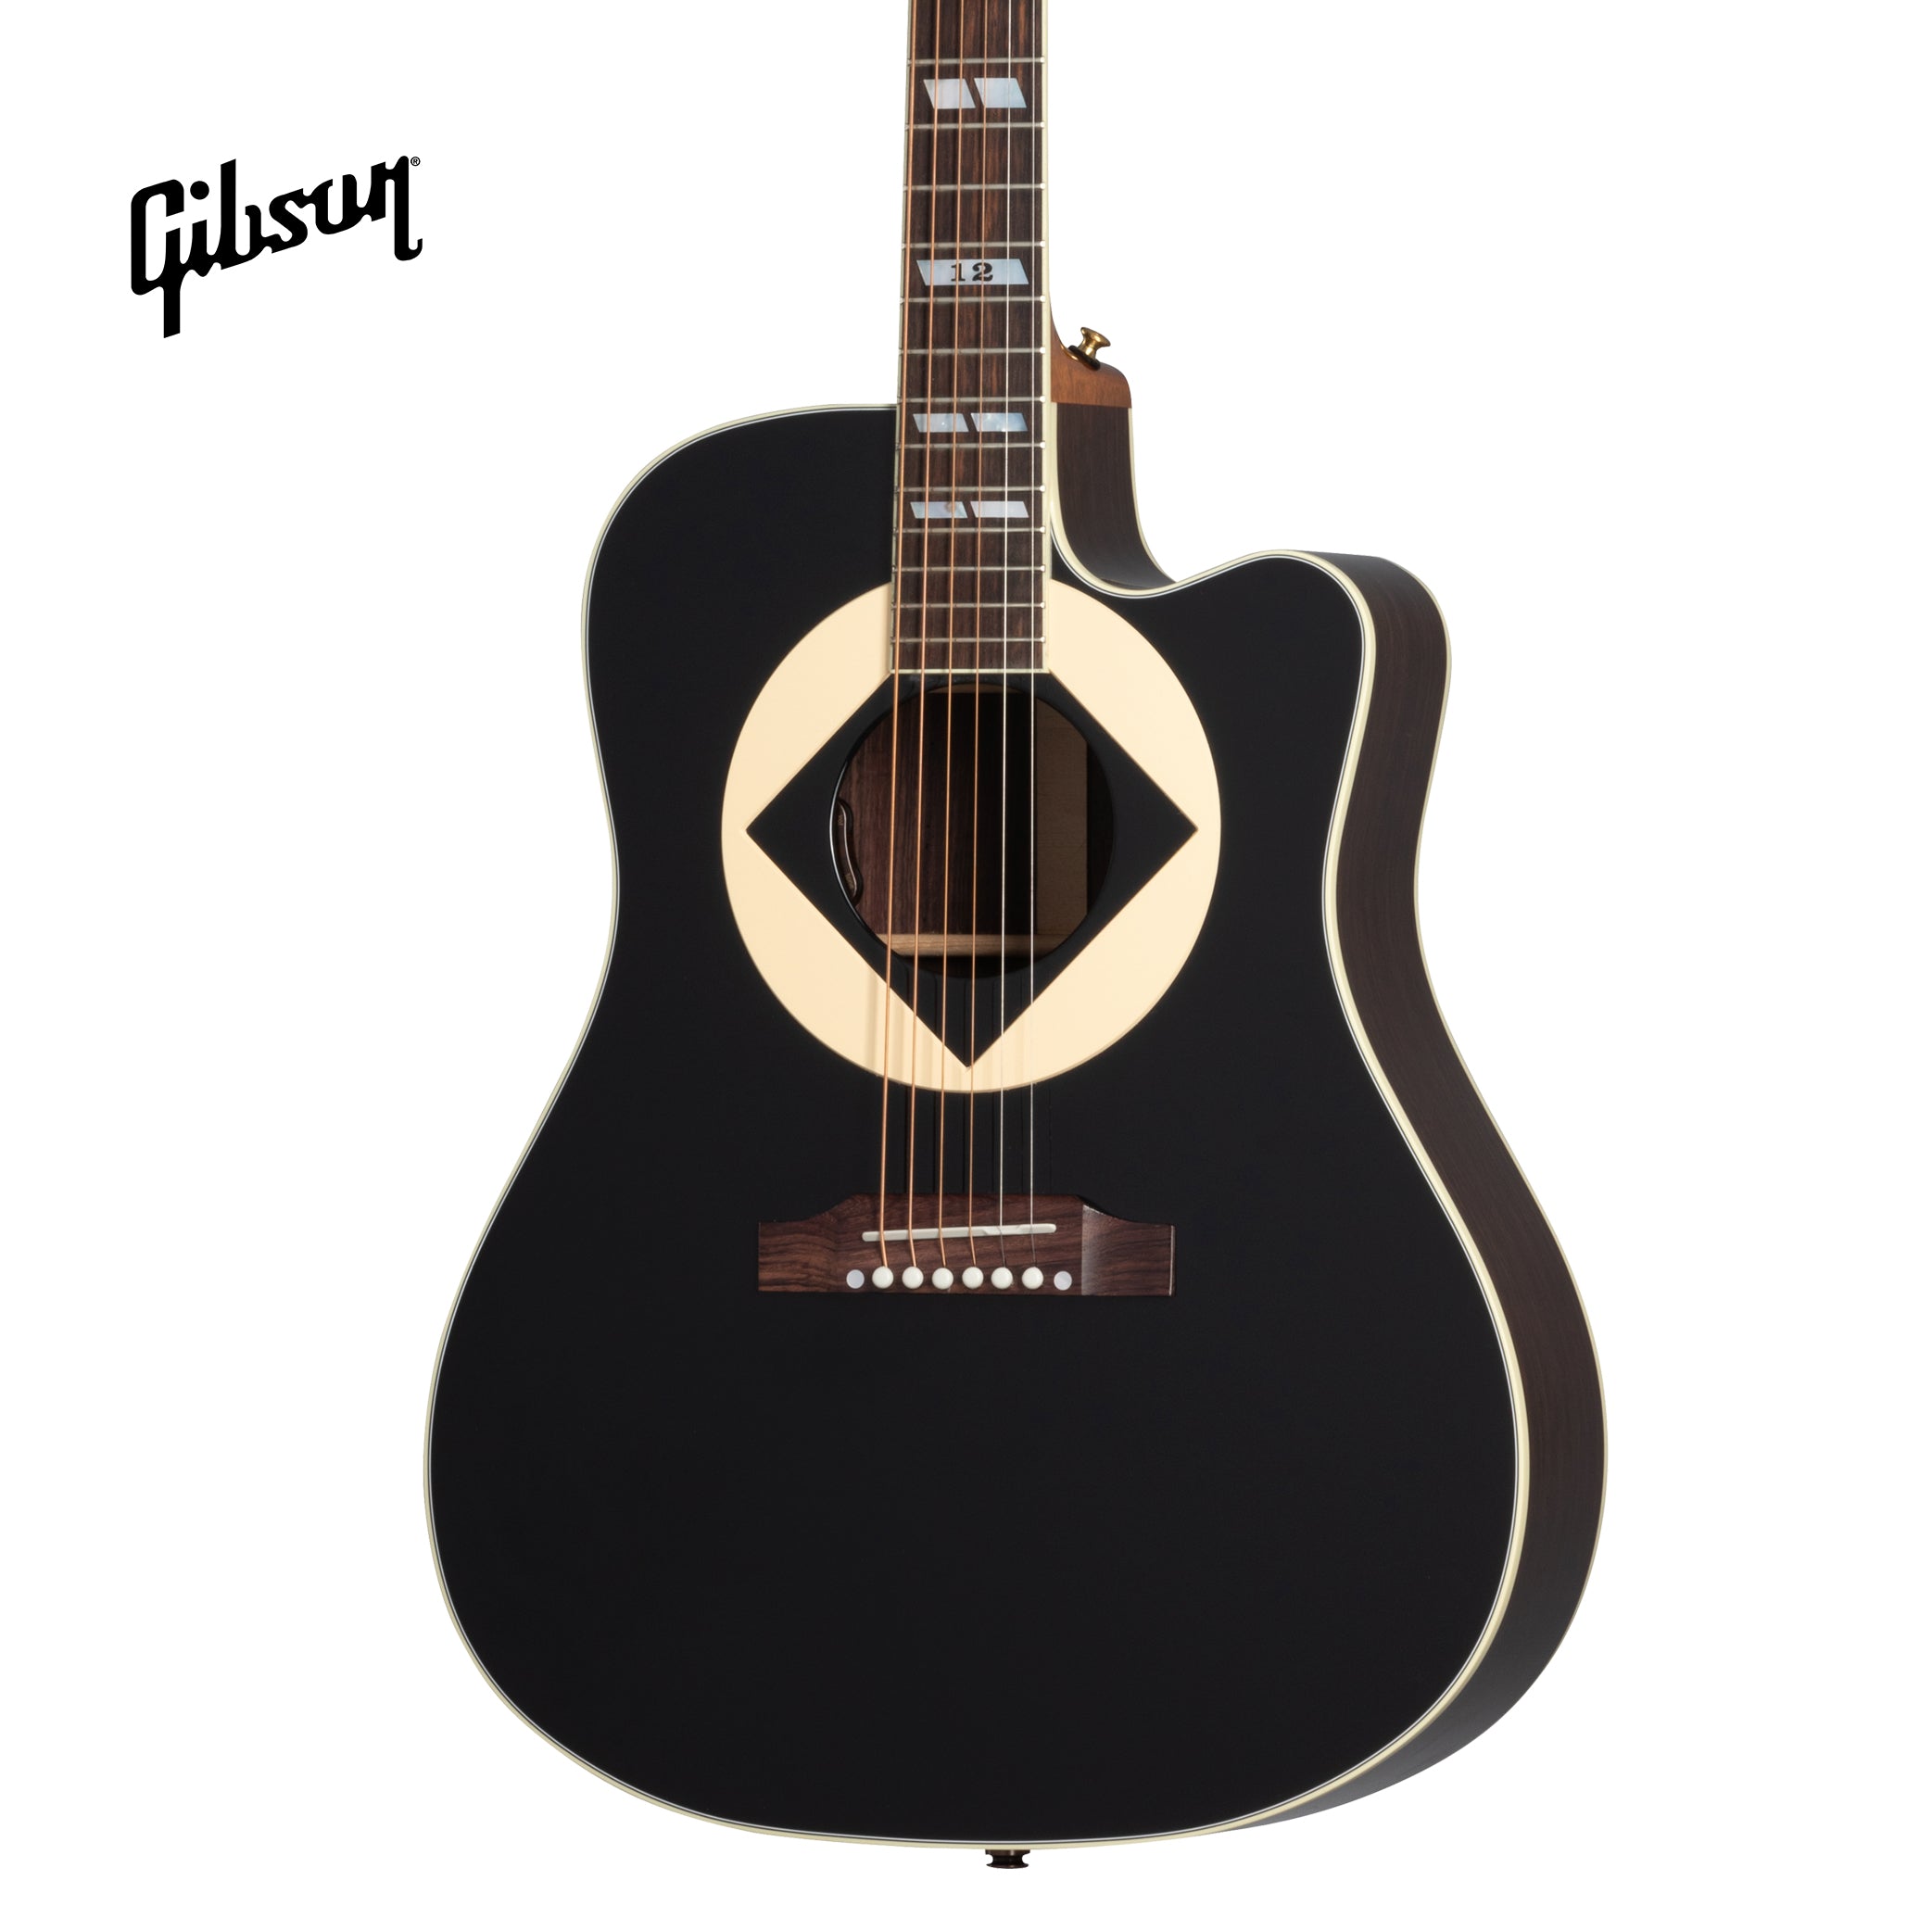 GIBSON JERRY CANTRELL SONGWRITER ACOUSTIC-ELECTRIC GUITAR - EBONY